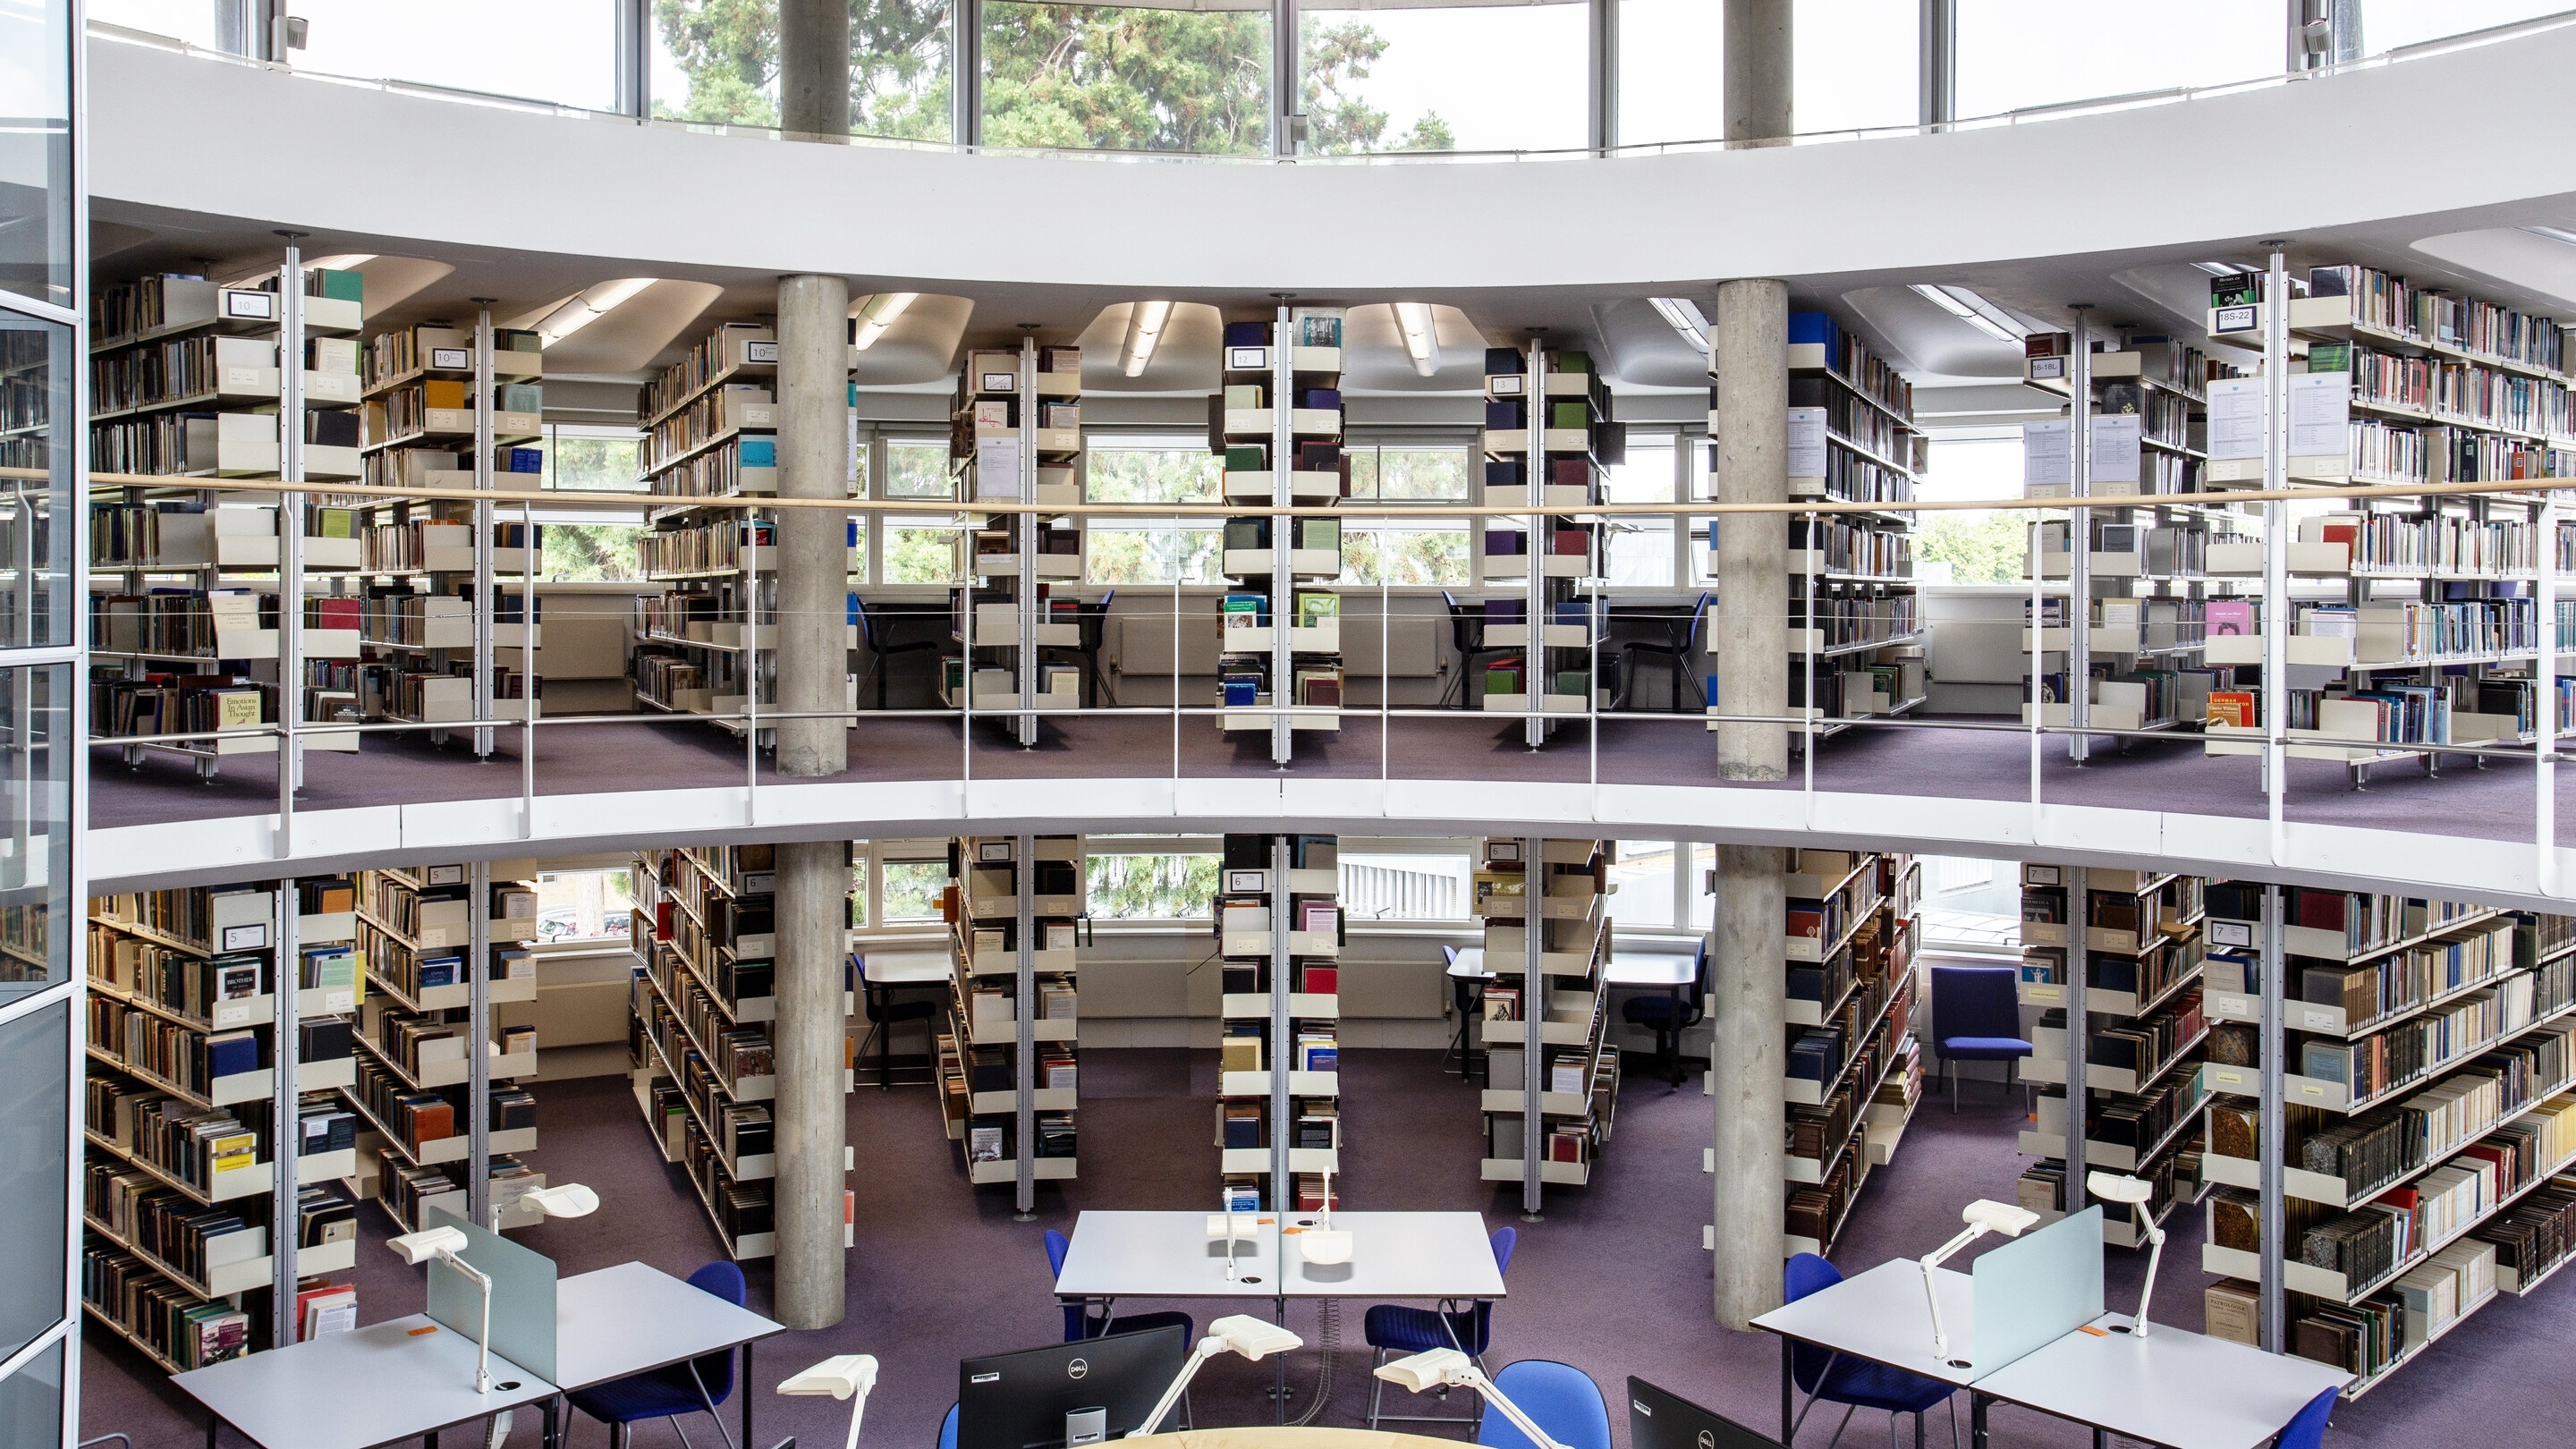 An academic institution built for posterity requires furniture that&#8217;s adaptable and long-lasting